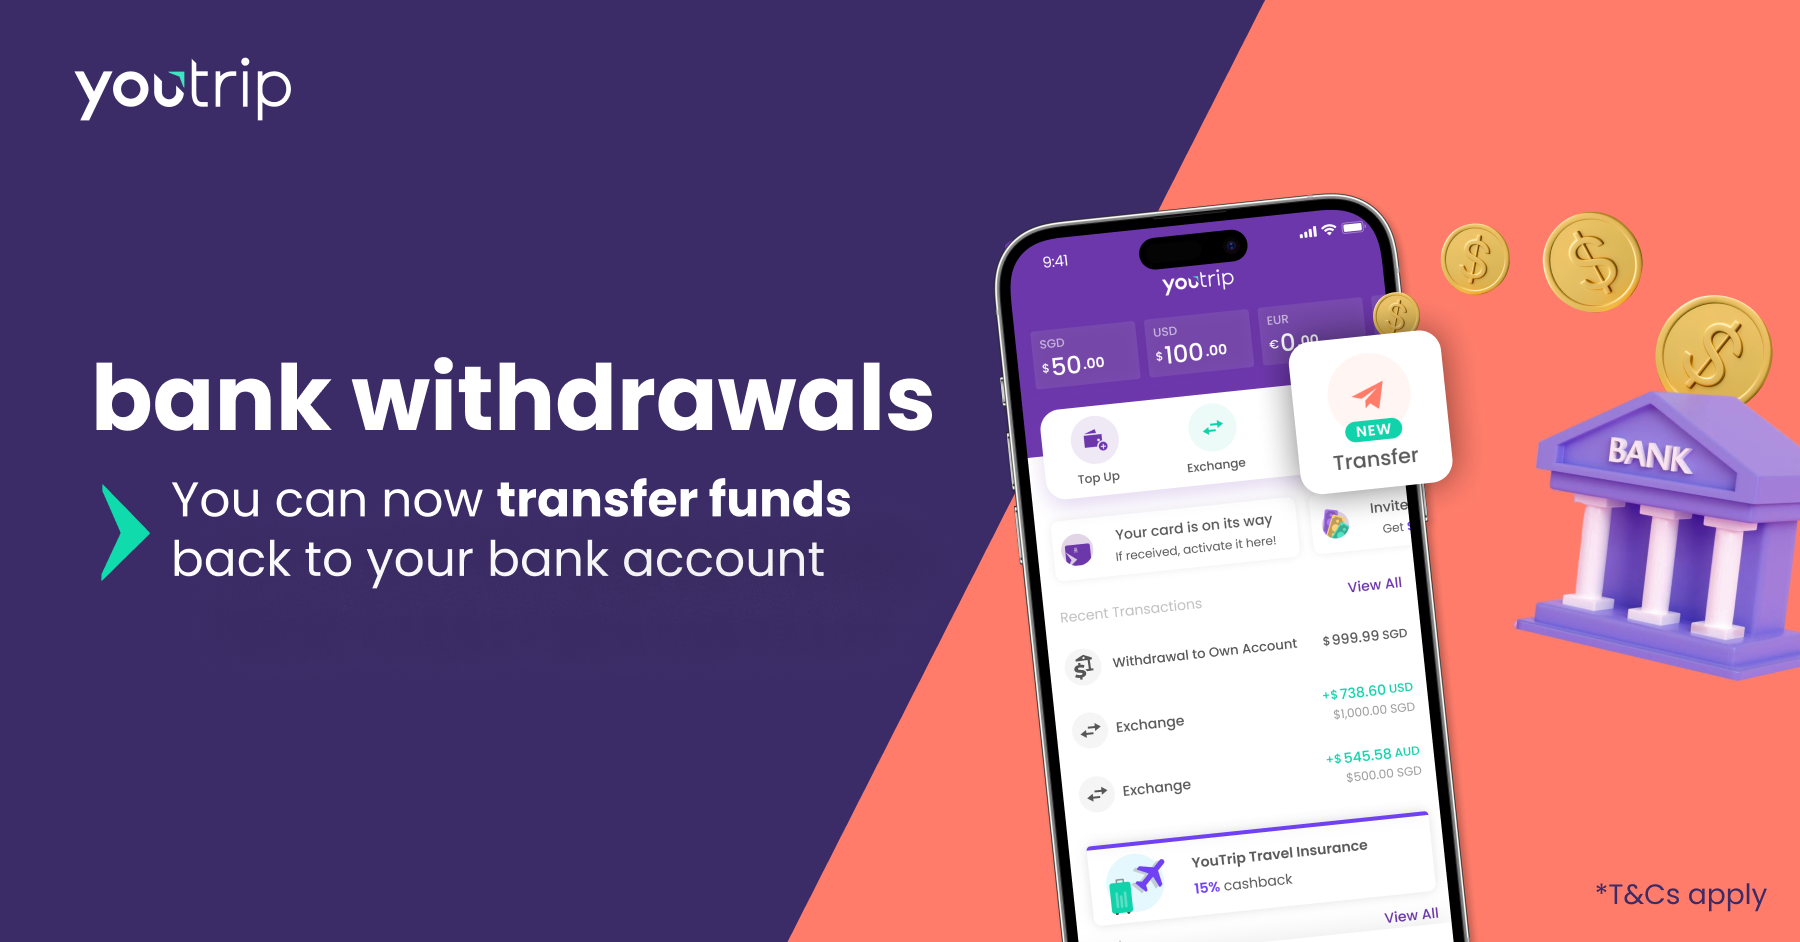 Bank Withdrawals Now Available: Transfer Funds From YouTrip Back To Your Bank Account